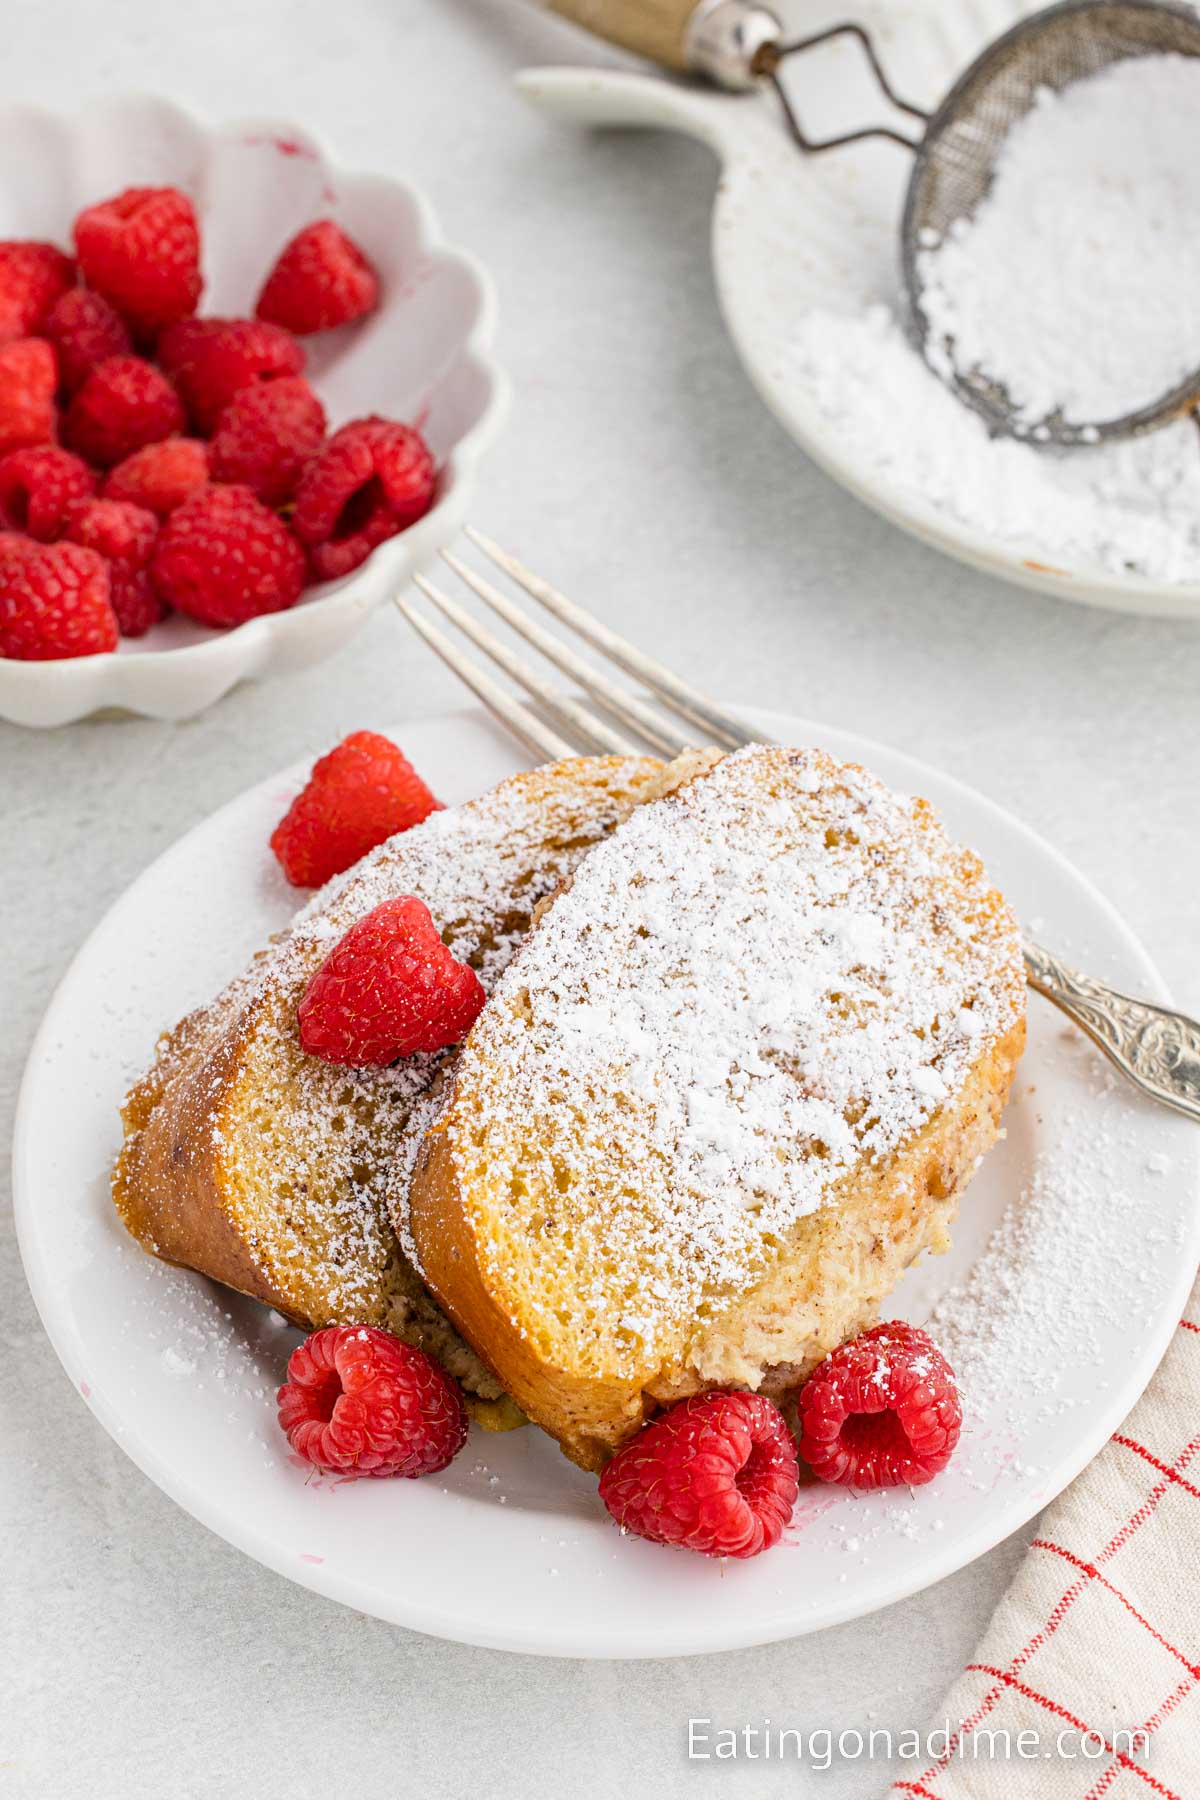 Slice of French Bread on a plate topped with powdered sugar and fresh berries